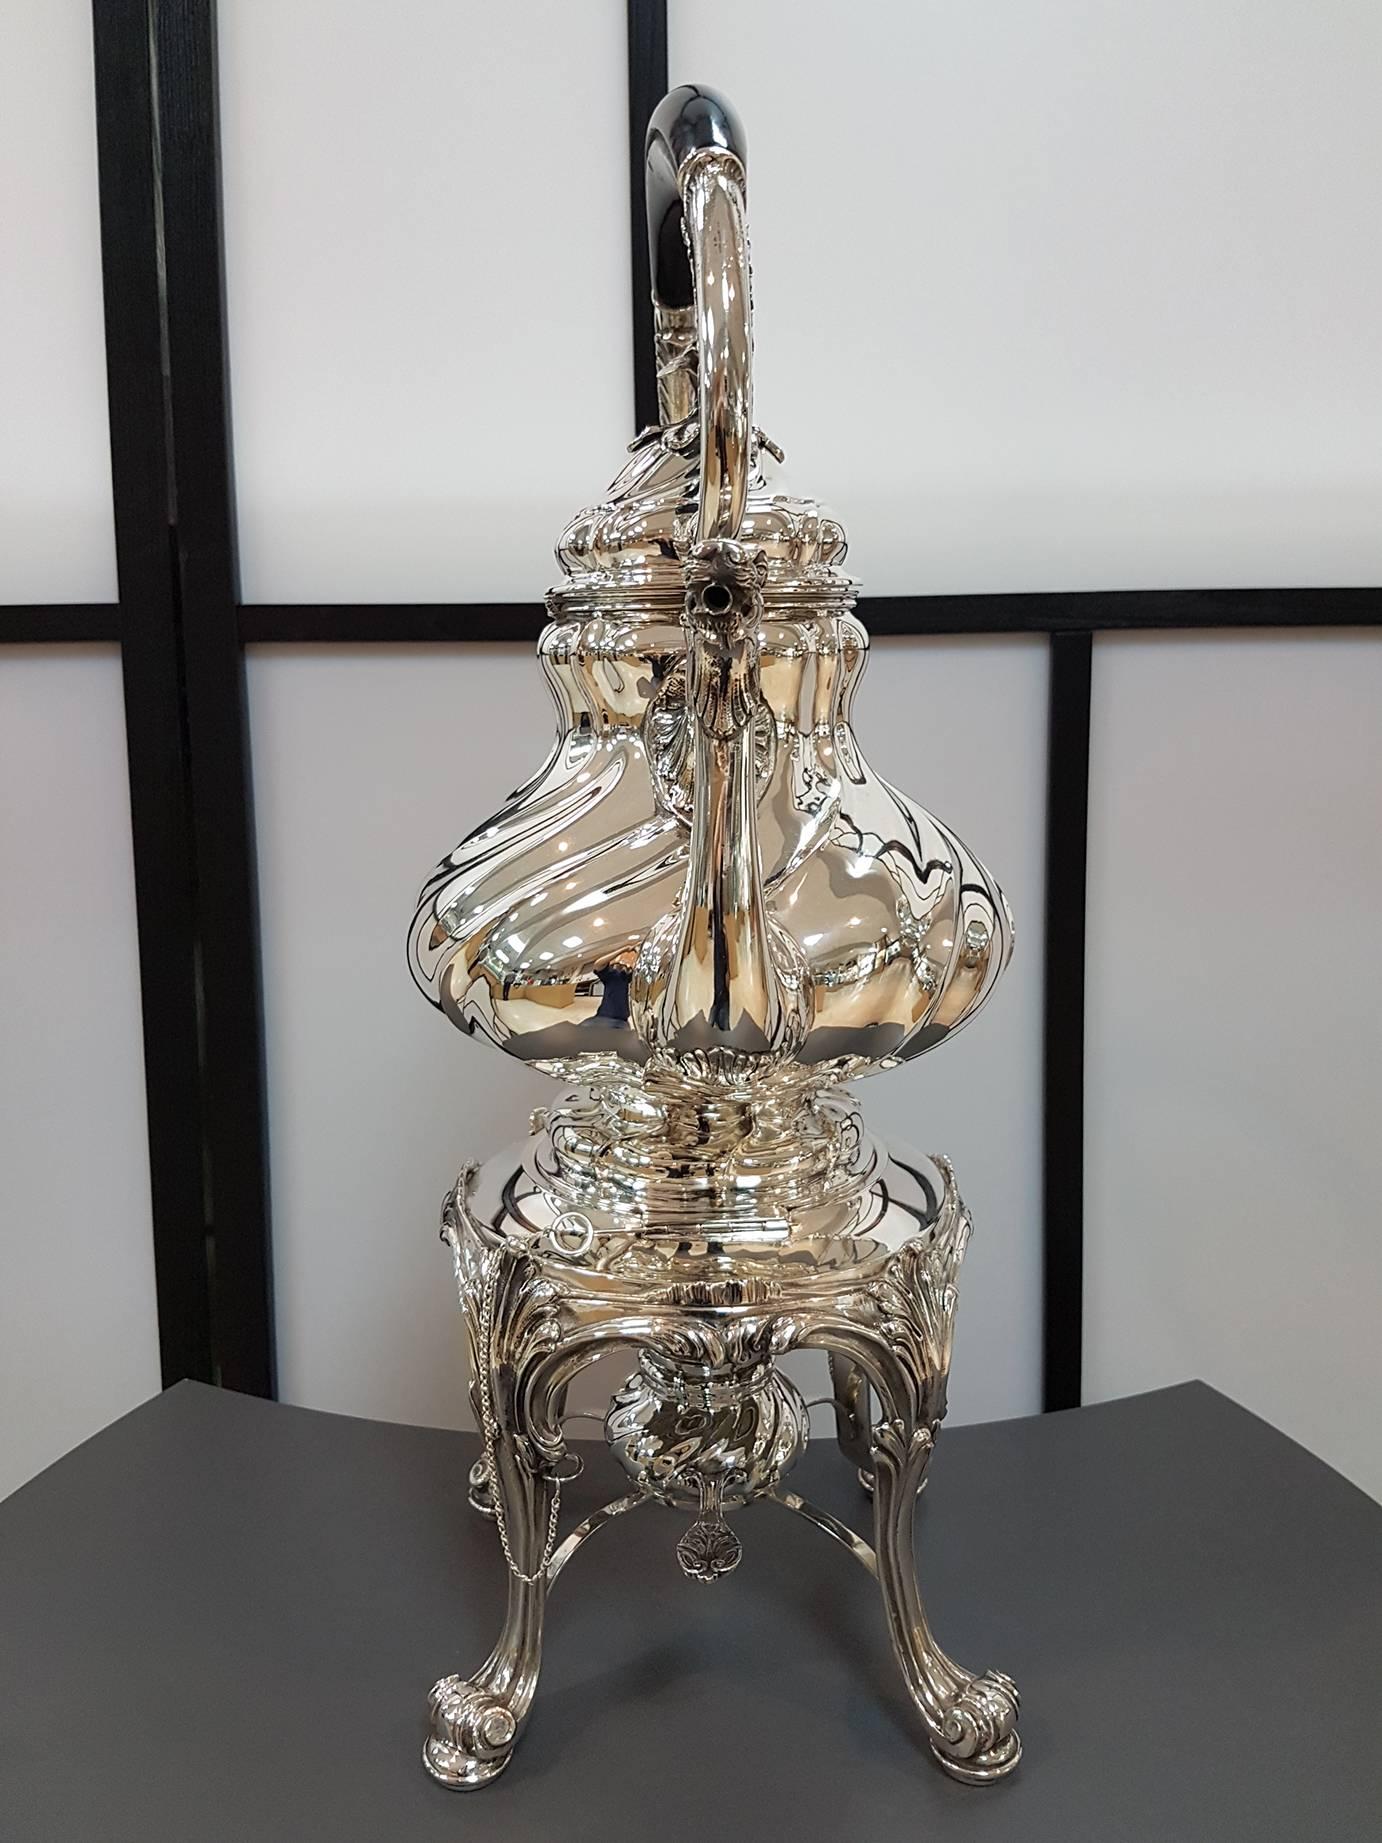 Samovar in Baroque style torchon in silver 800.
Made in Milan, circa 1935.
The duty marks, very clear, are of fascist times
Measure: 3,002 grams.